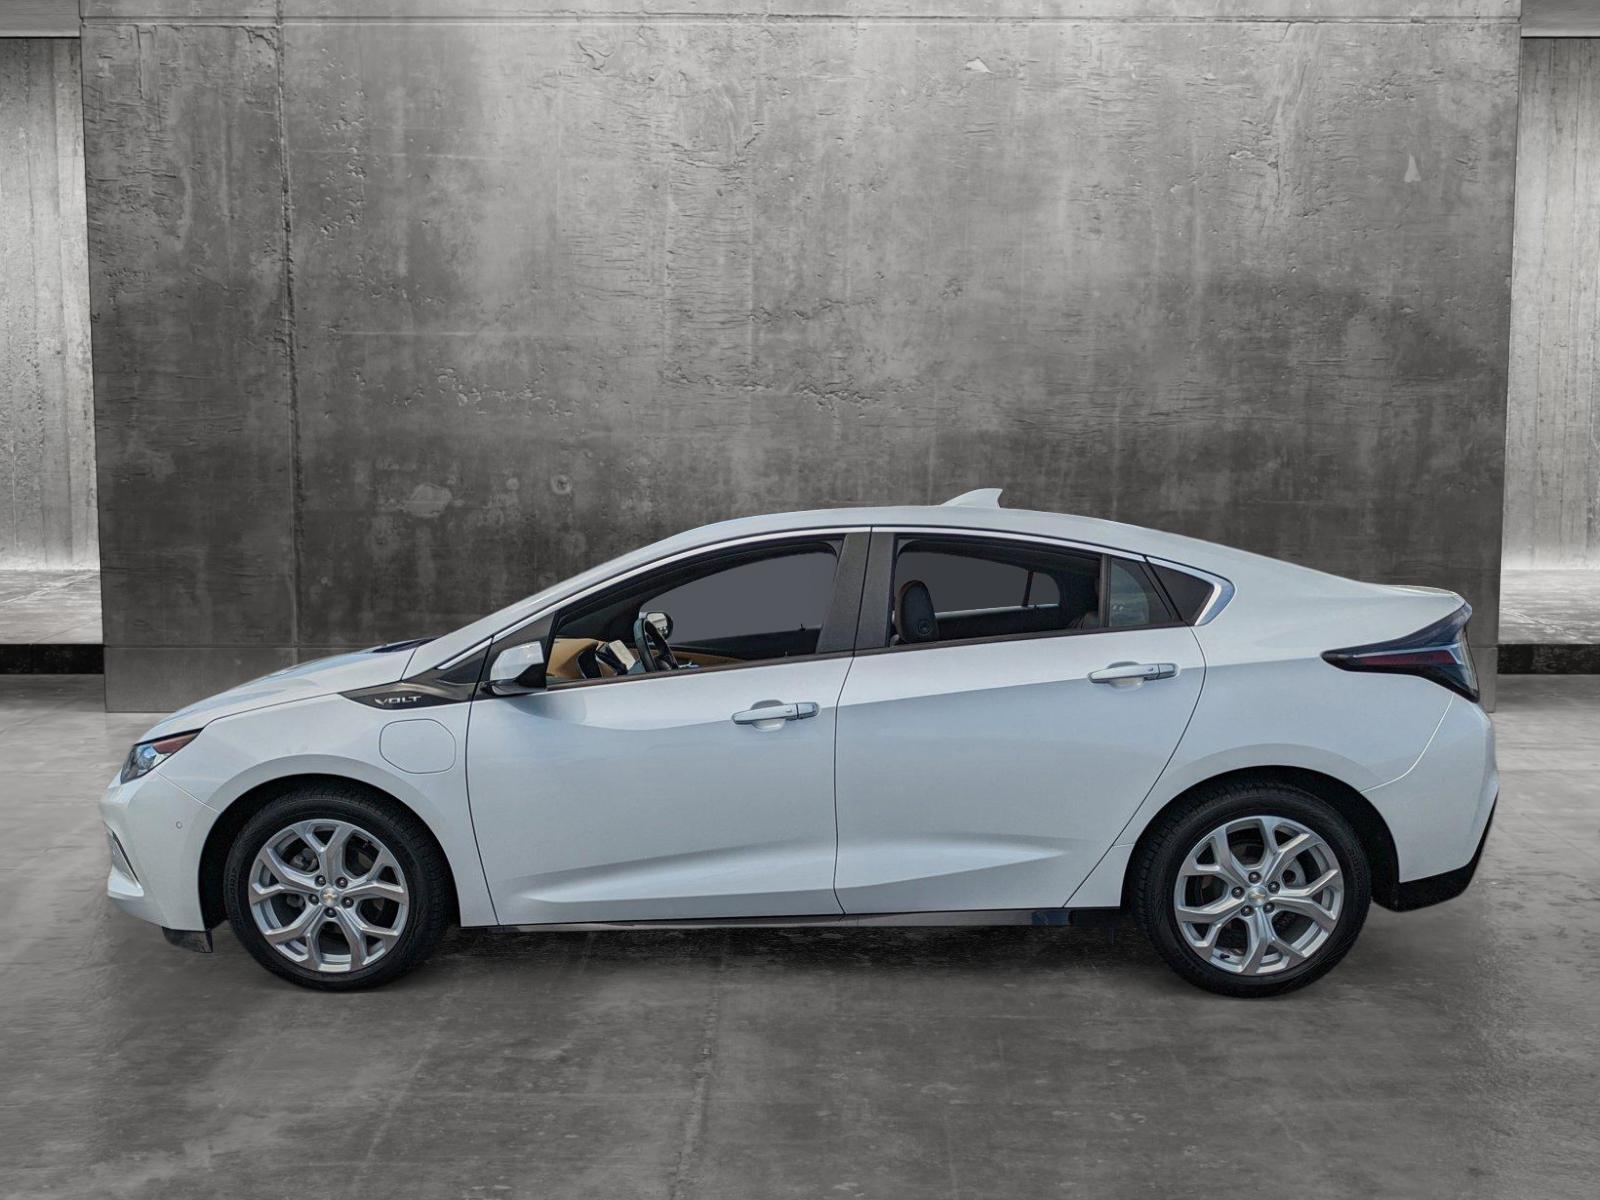 2017 Chevrolet Volt Vehicle Photo in CLEARWATER, FL 33764-7163